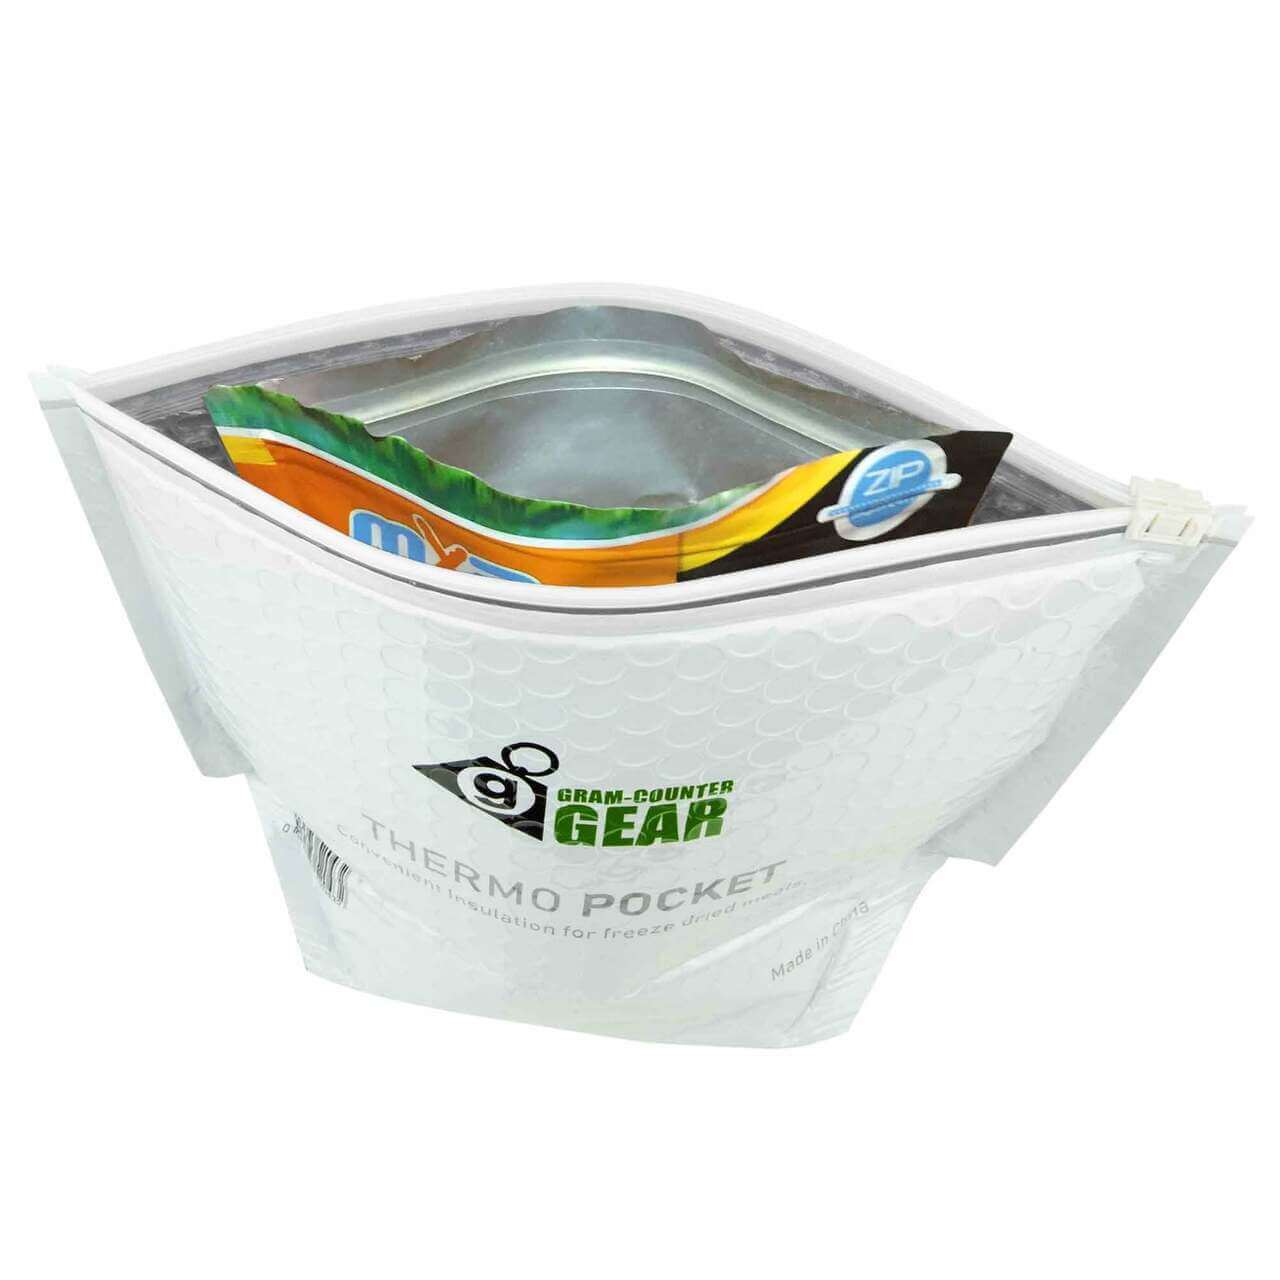 Gram-counter Gear Thermo Pocket Insulated Food Pouch